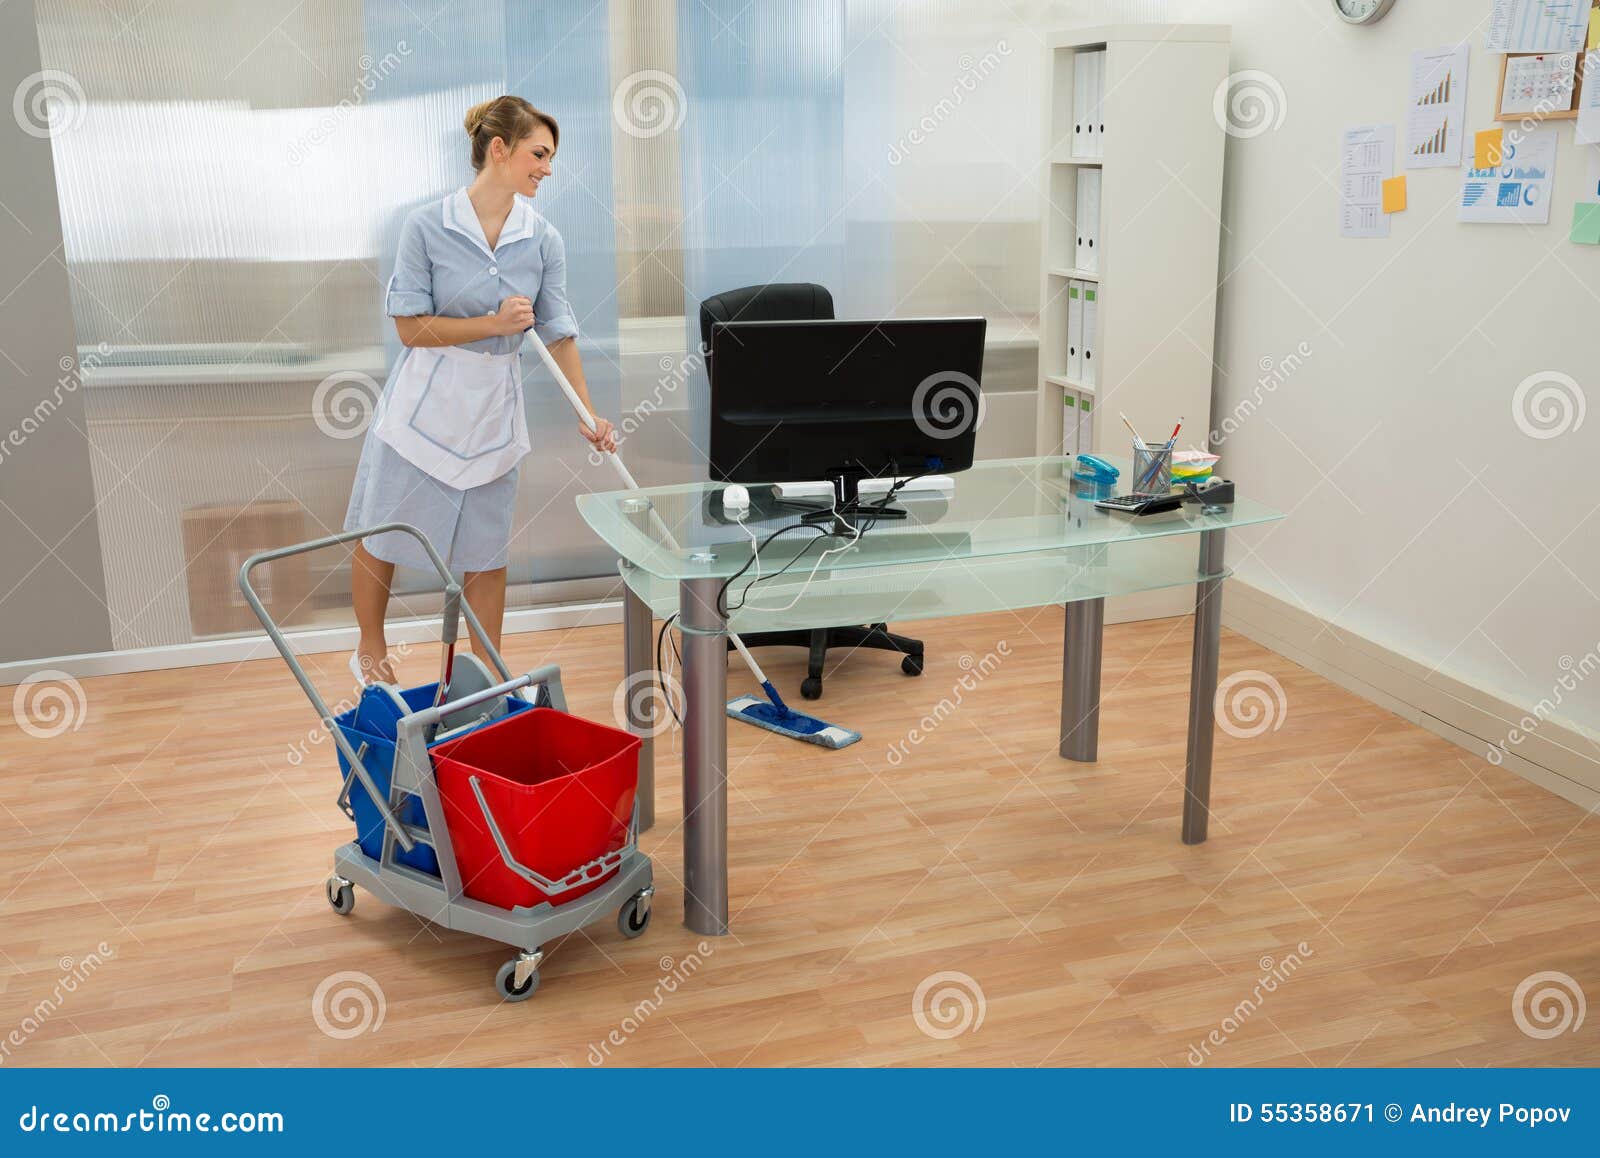 Maid with mop in office stock image. Image of hygiene - 55358671